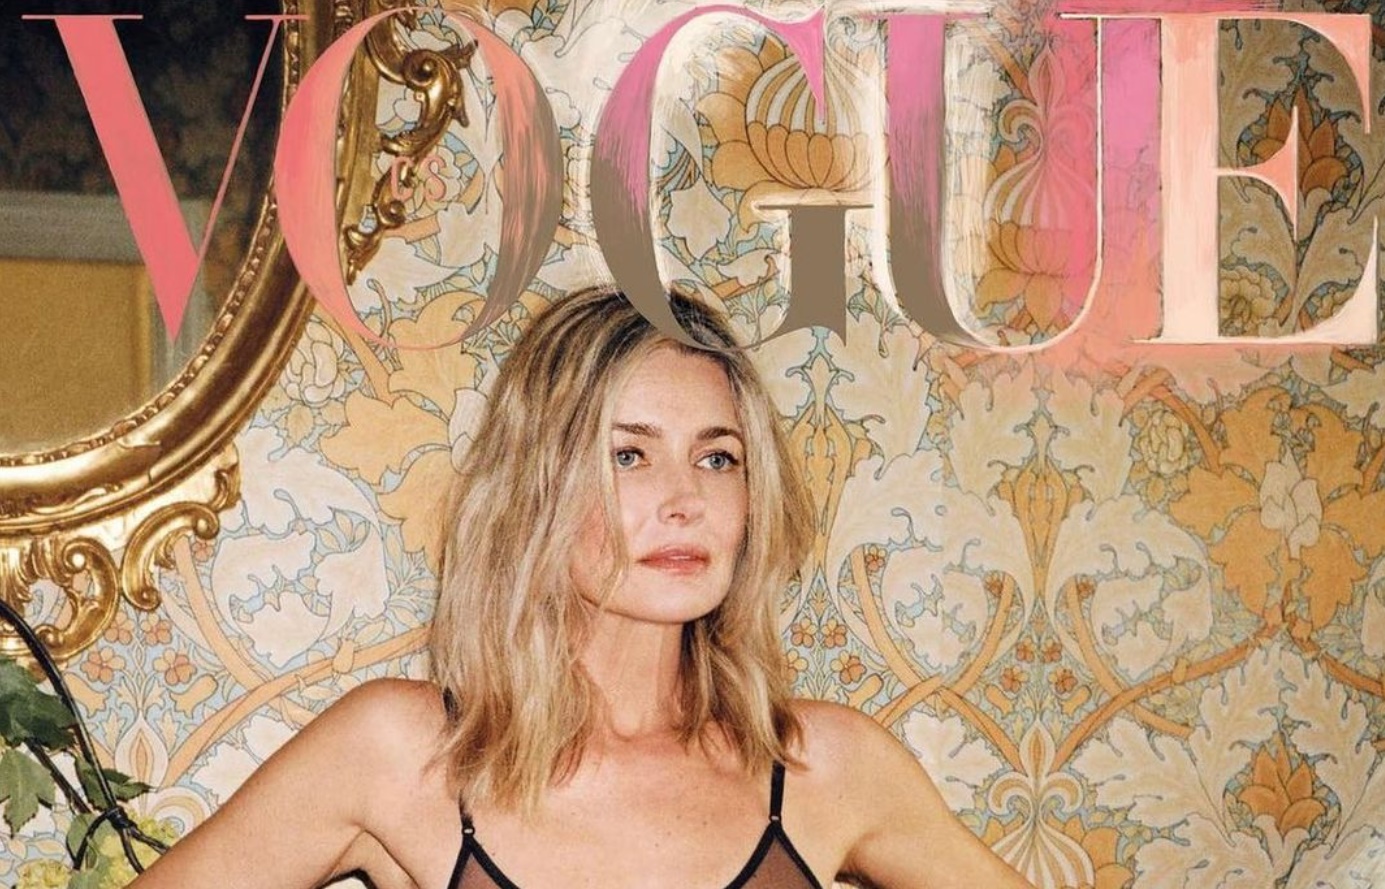 Model Paulina Porizkova On The Cover Of Vogue Free Link Submissions.